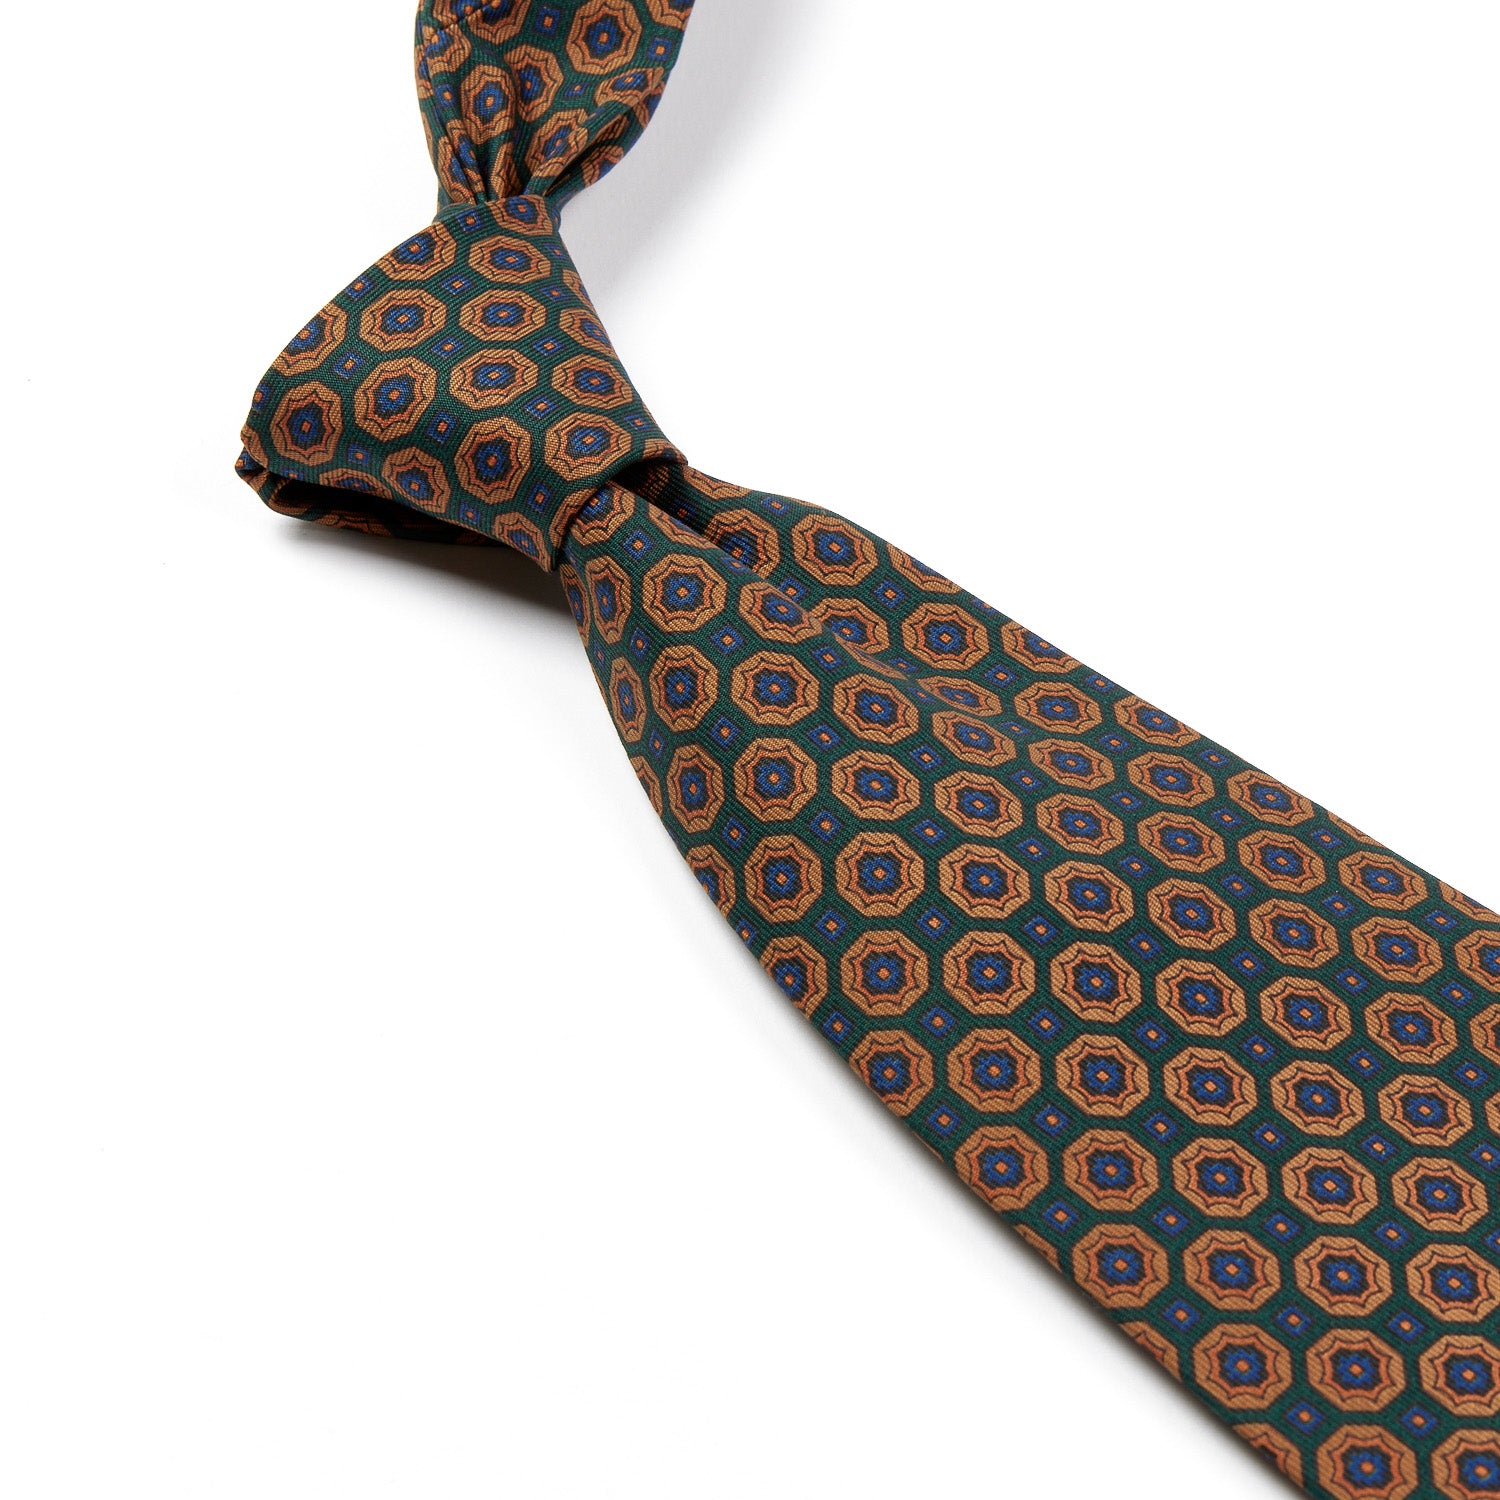 KirbyAllison.com's sovereign grade Green/Tan Floral Medallion Ancient Madder Tie, featuring a vibrant orange and green pattern, showcases highest quality craftsmanship.